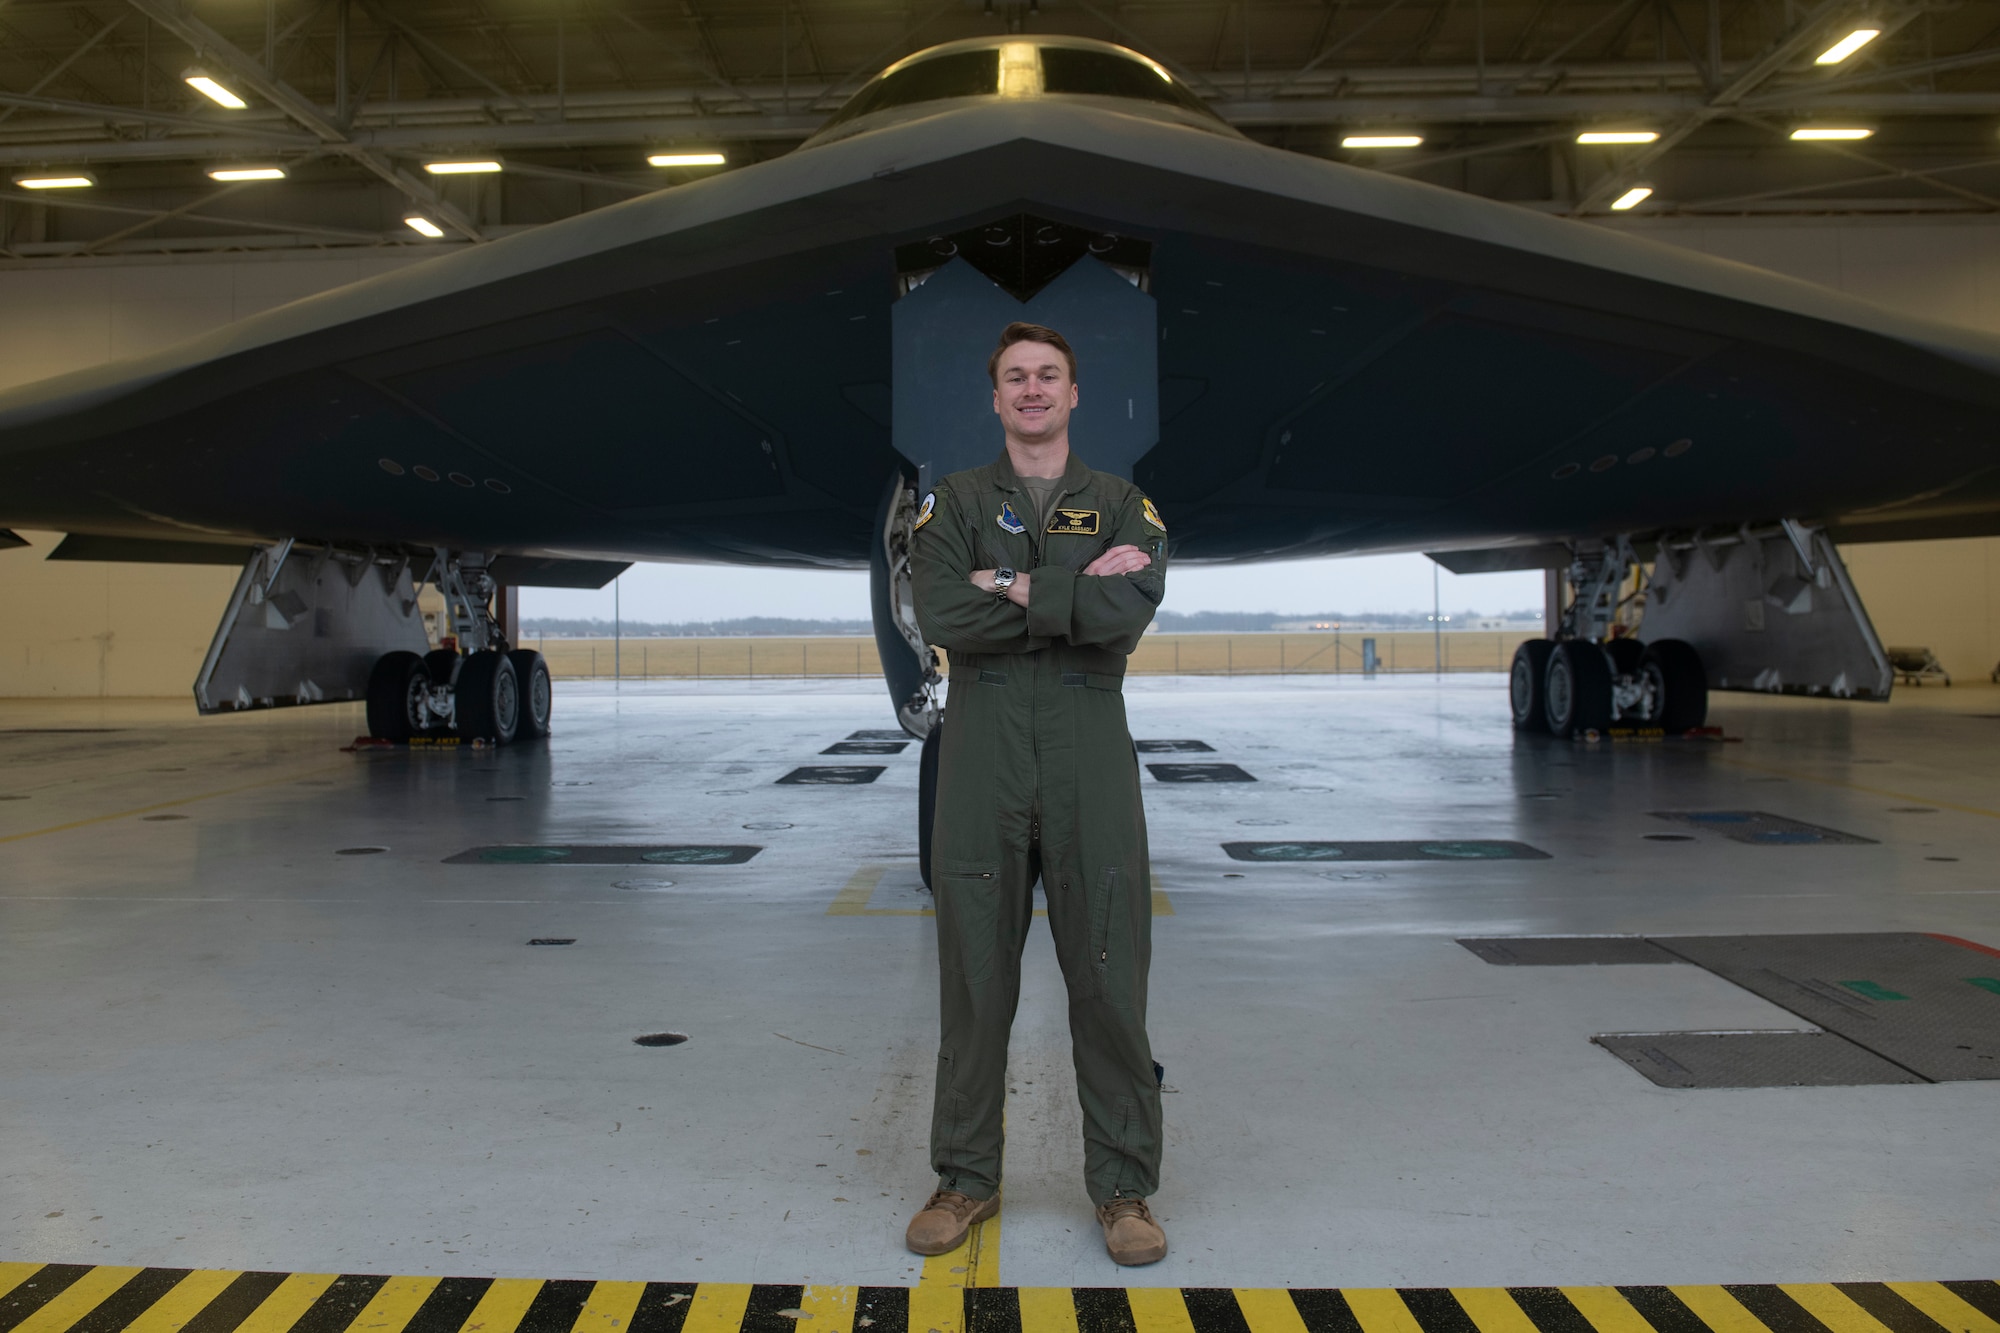 U.S. Air Force Capt. Kyle Cassady, 393rd Bomb Squadron B-2 Spirit instructor pilot, stands in front of a B-2 Spirit Stealth Bomber Dec. 28, 2021, at Whiteman Air Force Base, Missouri. Cassady is one of the pilots that will perform the B-2 flyover for the 108th Rose Bowl Game between The Ohio State Buckeyes and the University of Utah Utes. Cassady has family ties not only to The Ohio State University, but to Rose Bowl game history. Capt. Cassady’s father and grandfather both played for the Buckeyes and both won a Rose Bowl game during their football career. His grandfather, Howard “Hopalong” Cassady, won the Heisman Trophy in 1955. (U.S. Air Force photo by Tech. Sgt. Dylan Nuckolls)